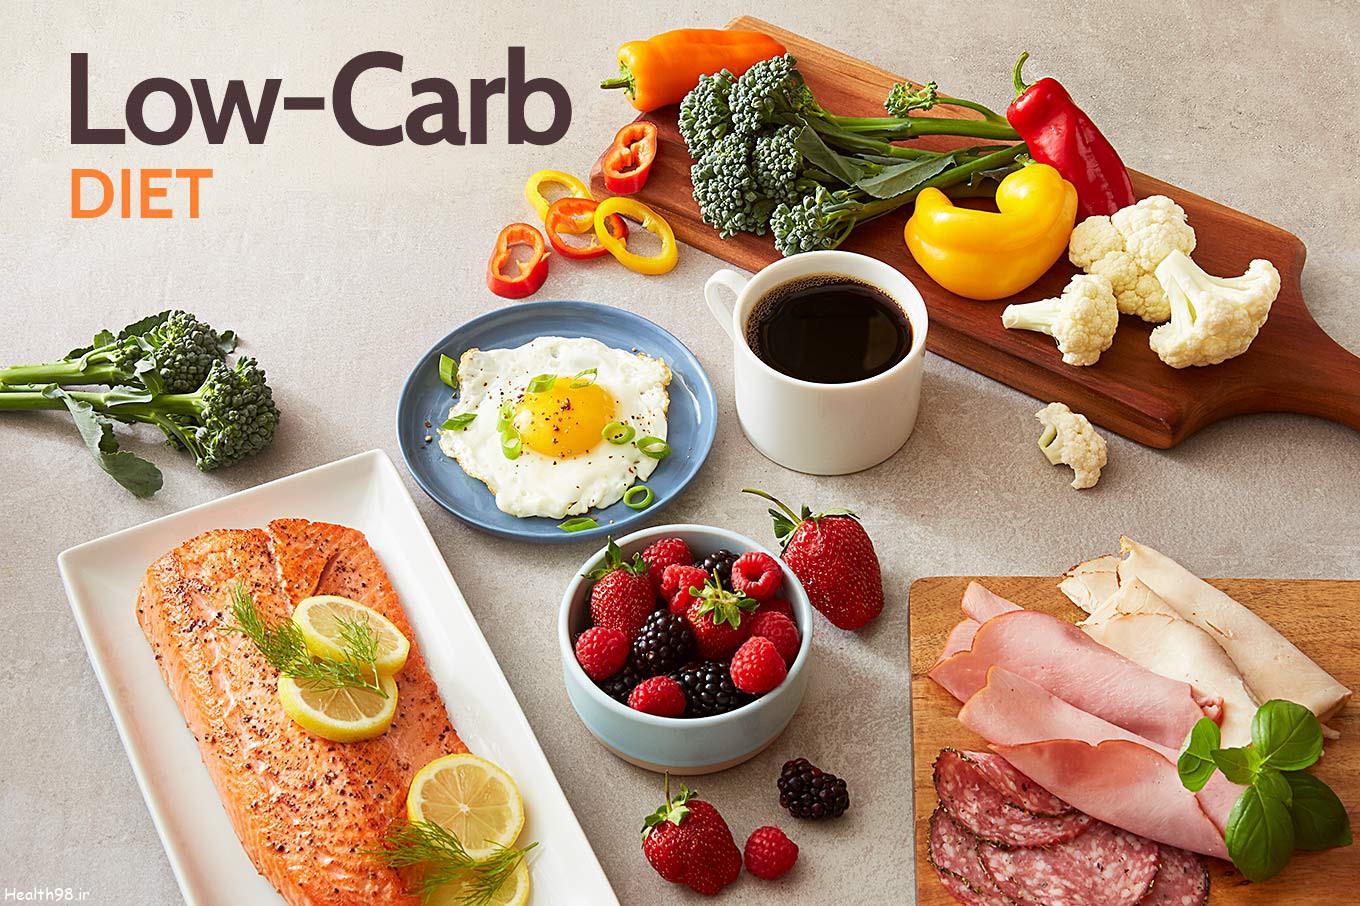 Starting Low-Carb Diet: 5 Steps For Success